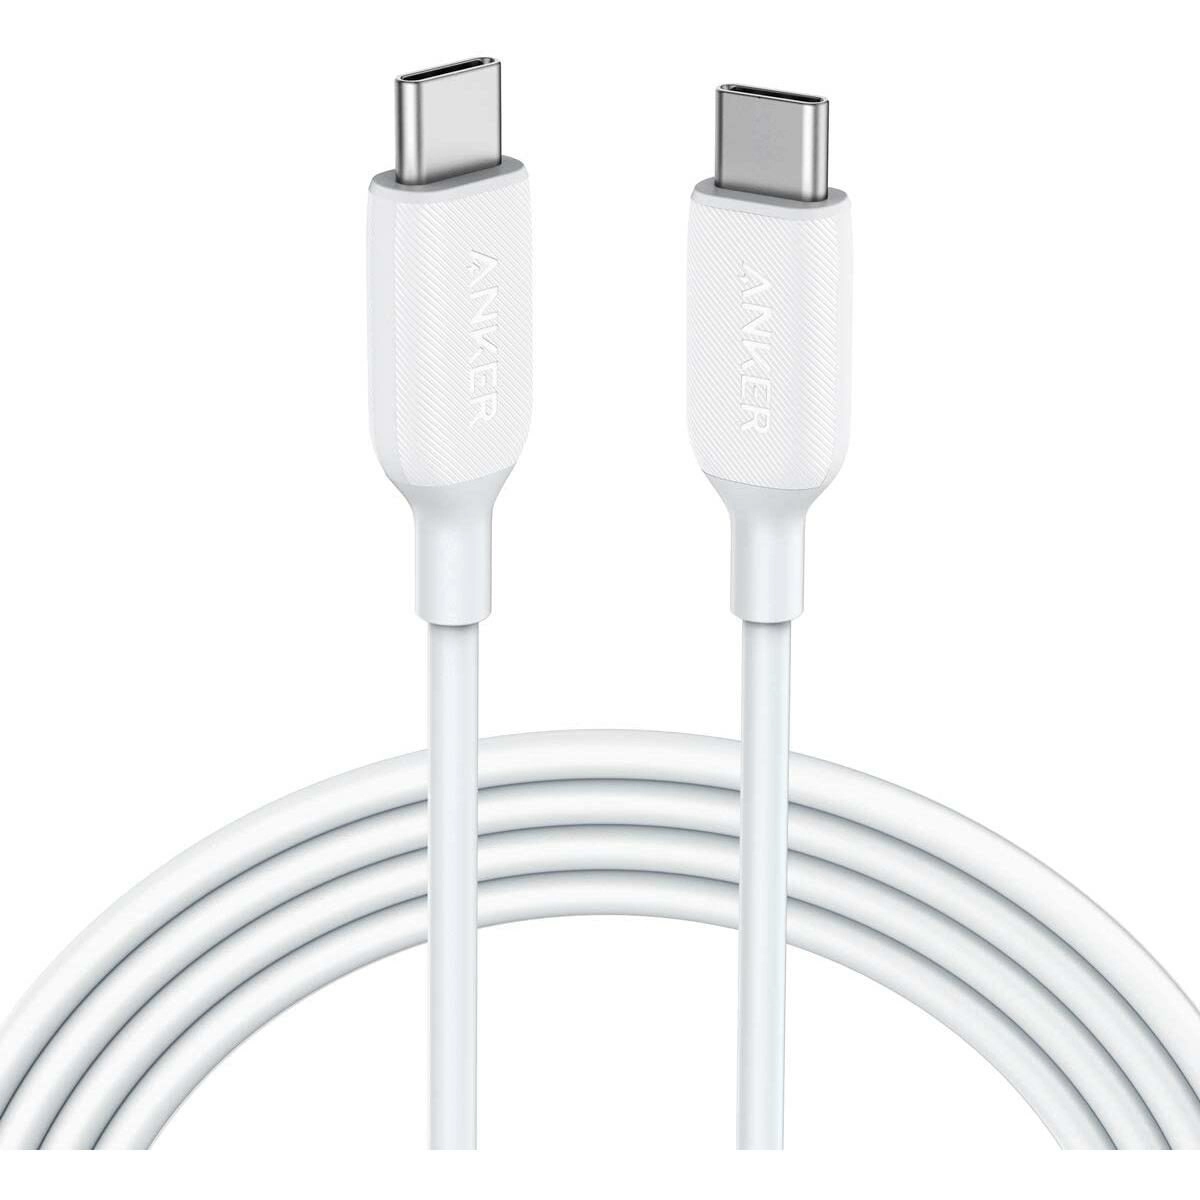 Anker Powerline III USB-C to USB-C Charging Cable